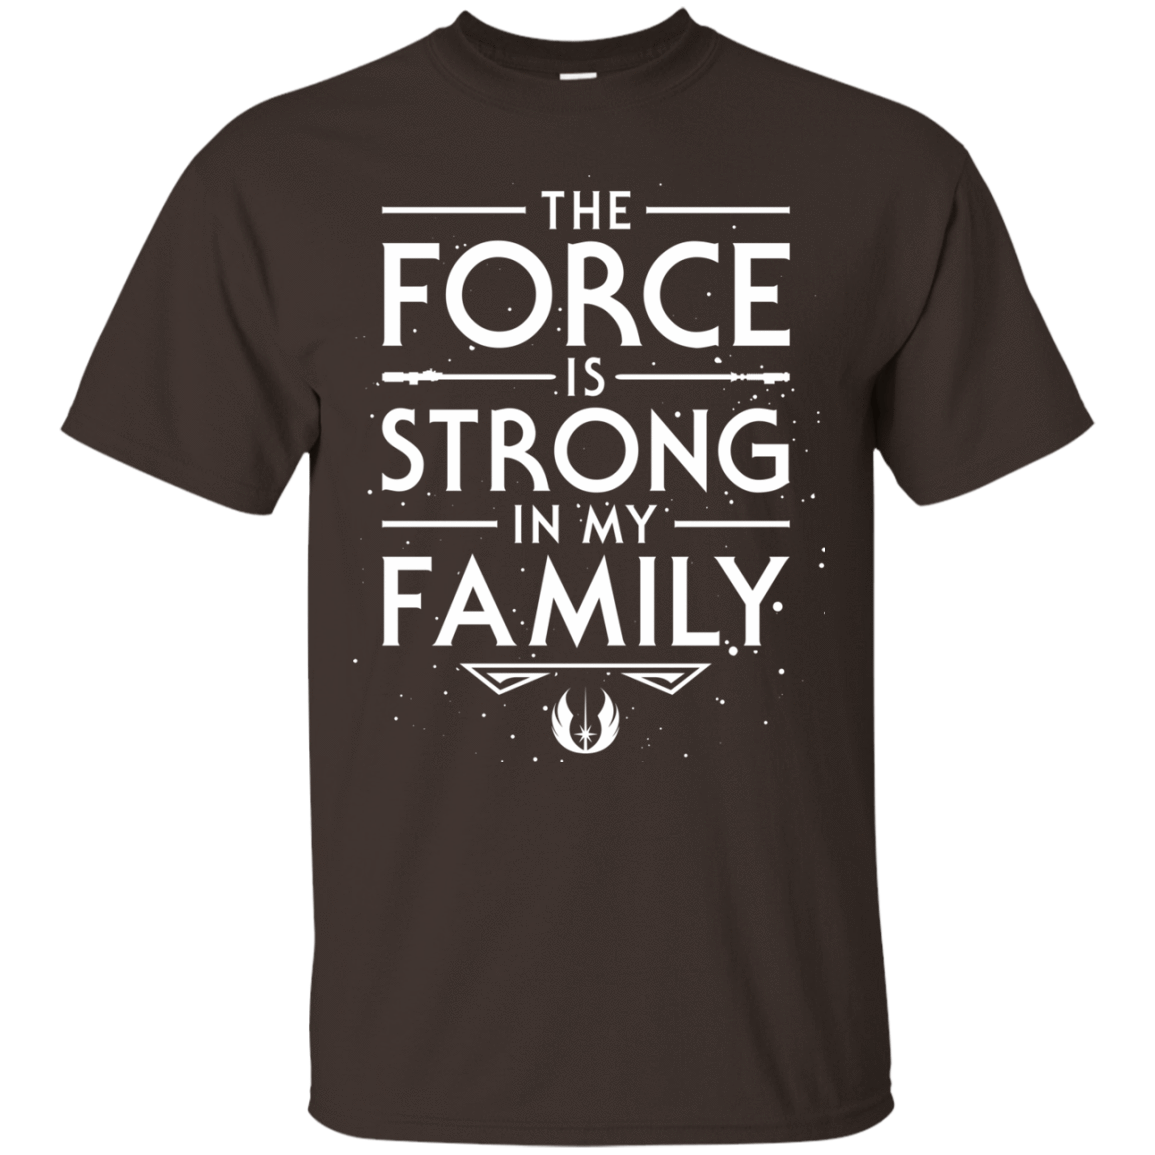 T-Shirts Dark Chocolate / S The Force is Strong in my Family T-Shirt